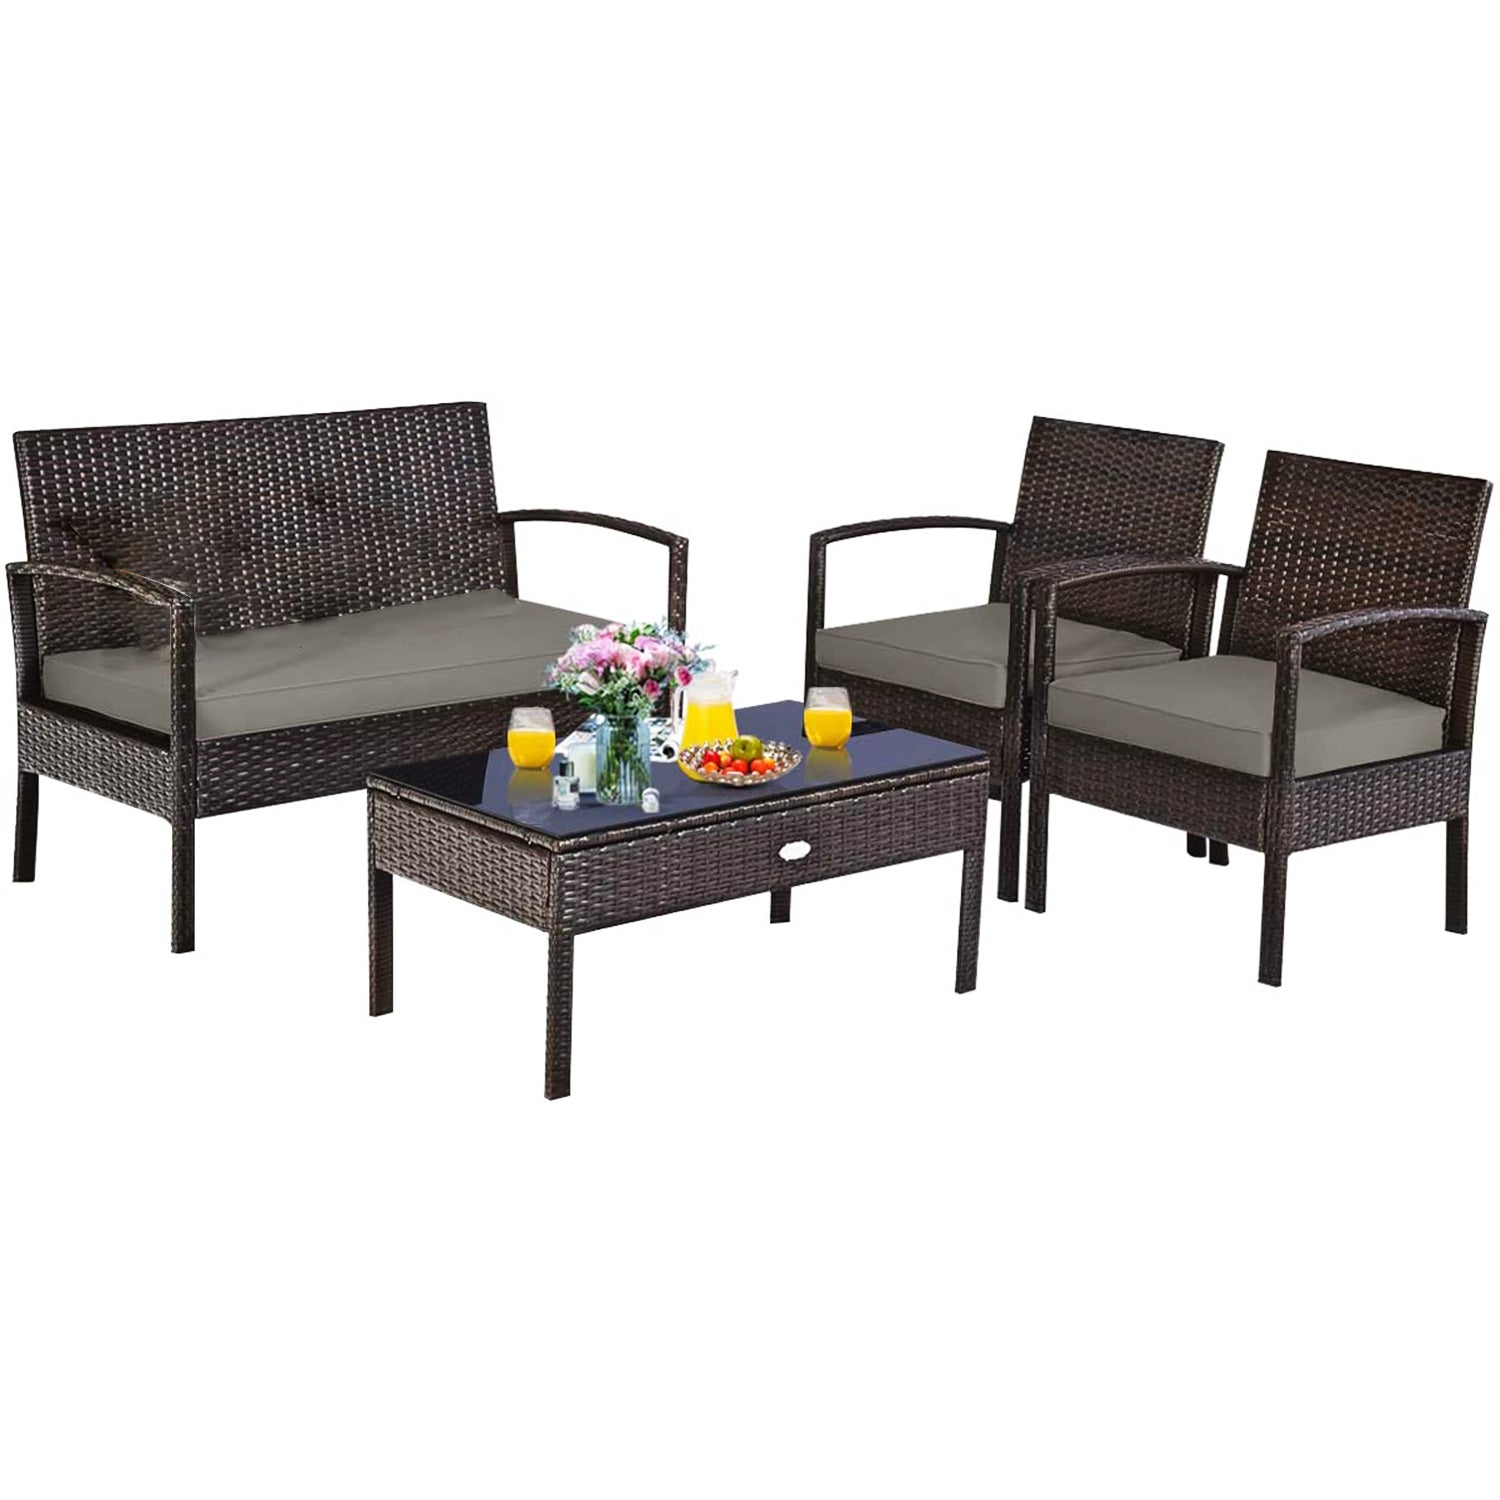 4-Piece Wicker Outdoor Patio Conversation Set with Tan Cushions and Coffee Table